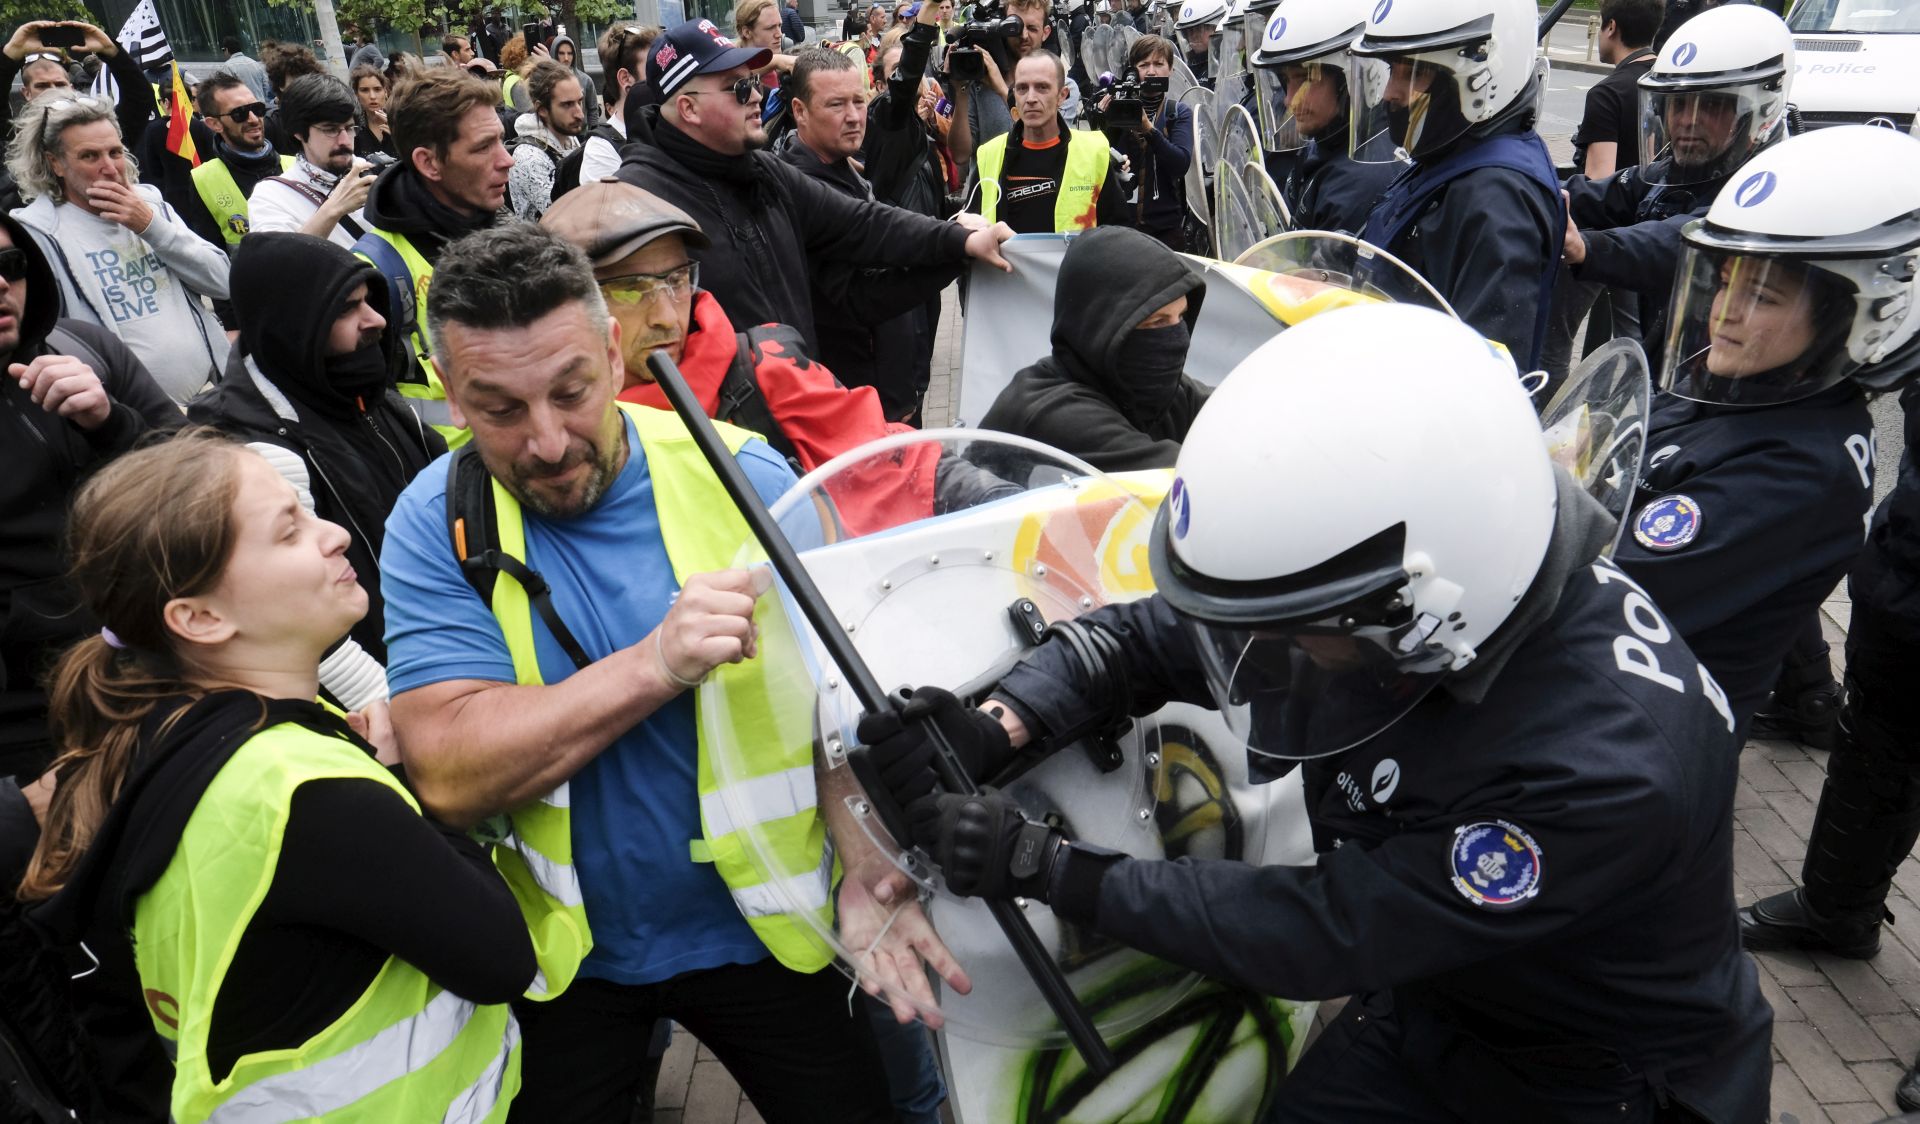 epa07602502 Protesters wearing yellow vests, commonly worn by transport drivers', clash with police during a protest against higher fuel prices organized by French and Belgium members of the yellow vests movement near European institution headquarters in Brussels, Belgium, 26 May 2019. The protest was aimed at disrupting the European Union institutes during the organizations elections, but protester broken up and arrested before the demonstration started.  EPA/OLIVIER HOSLET